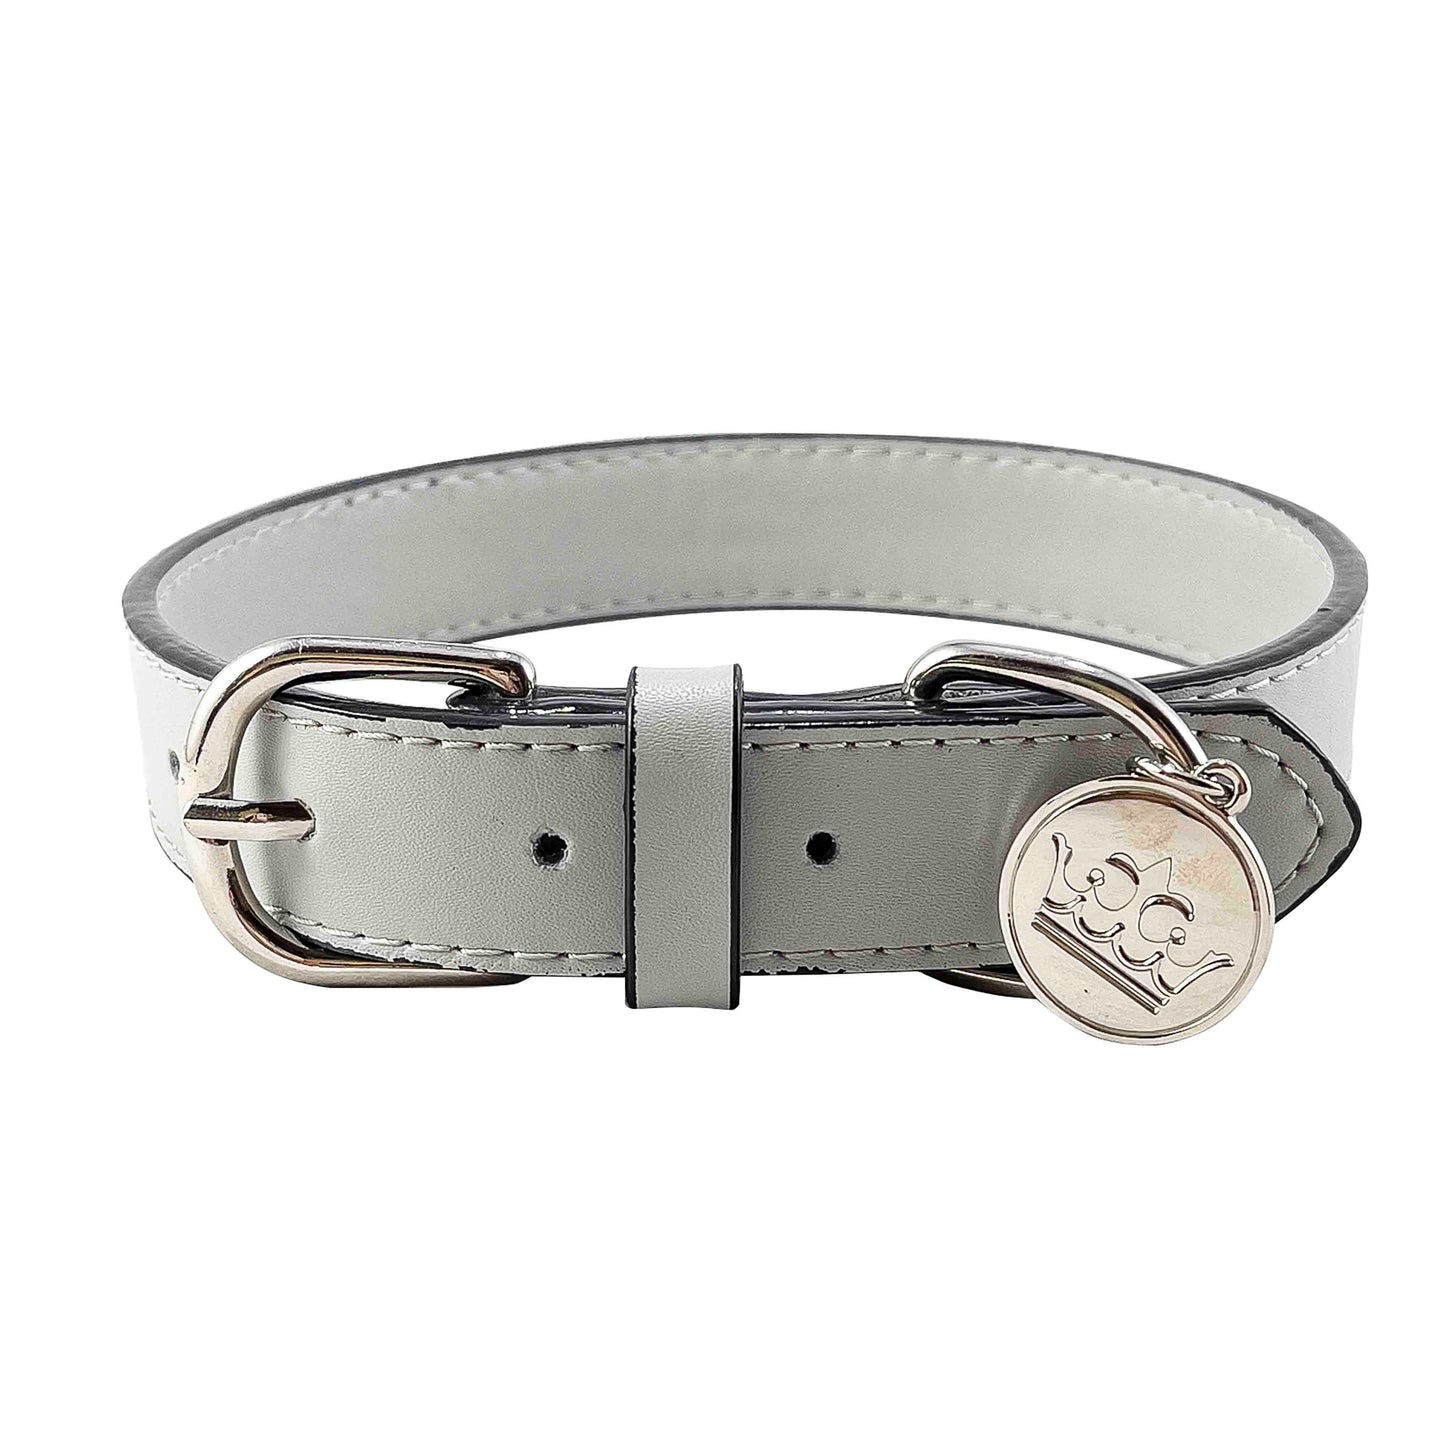 Bek & Co gray leather french bulldog collar with logo